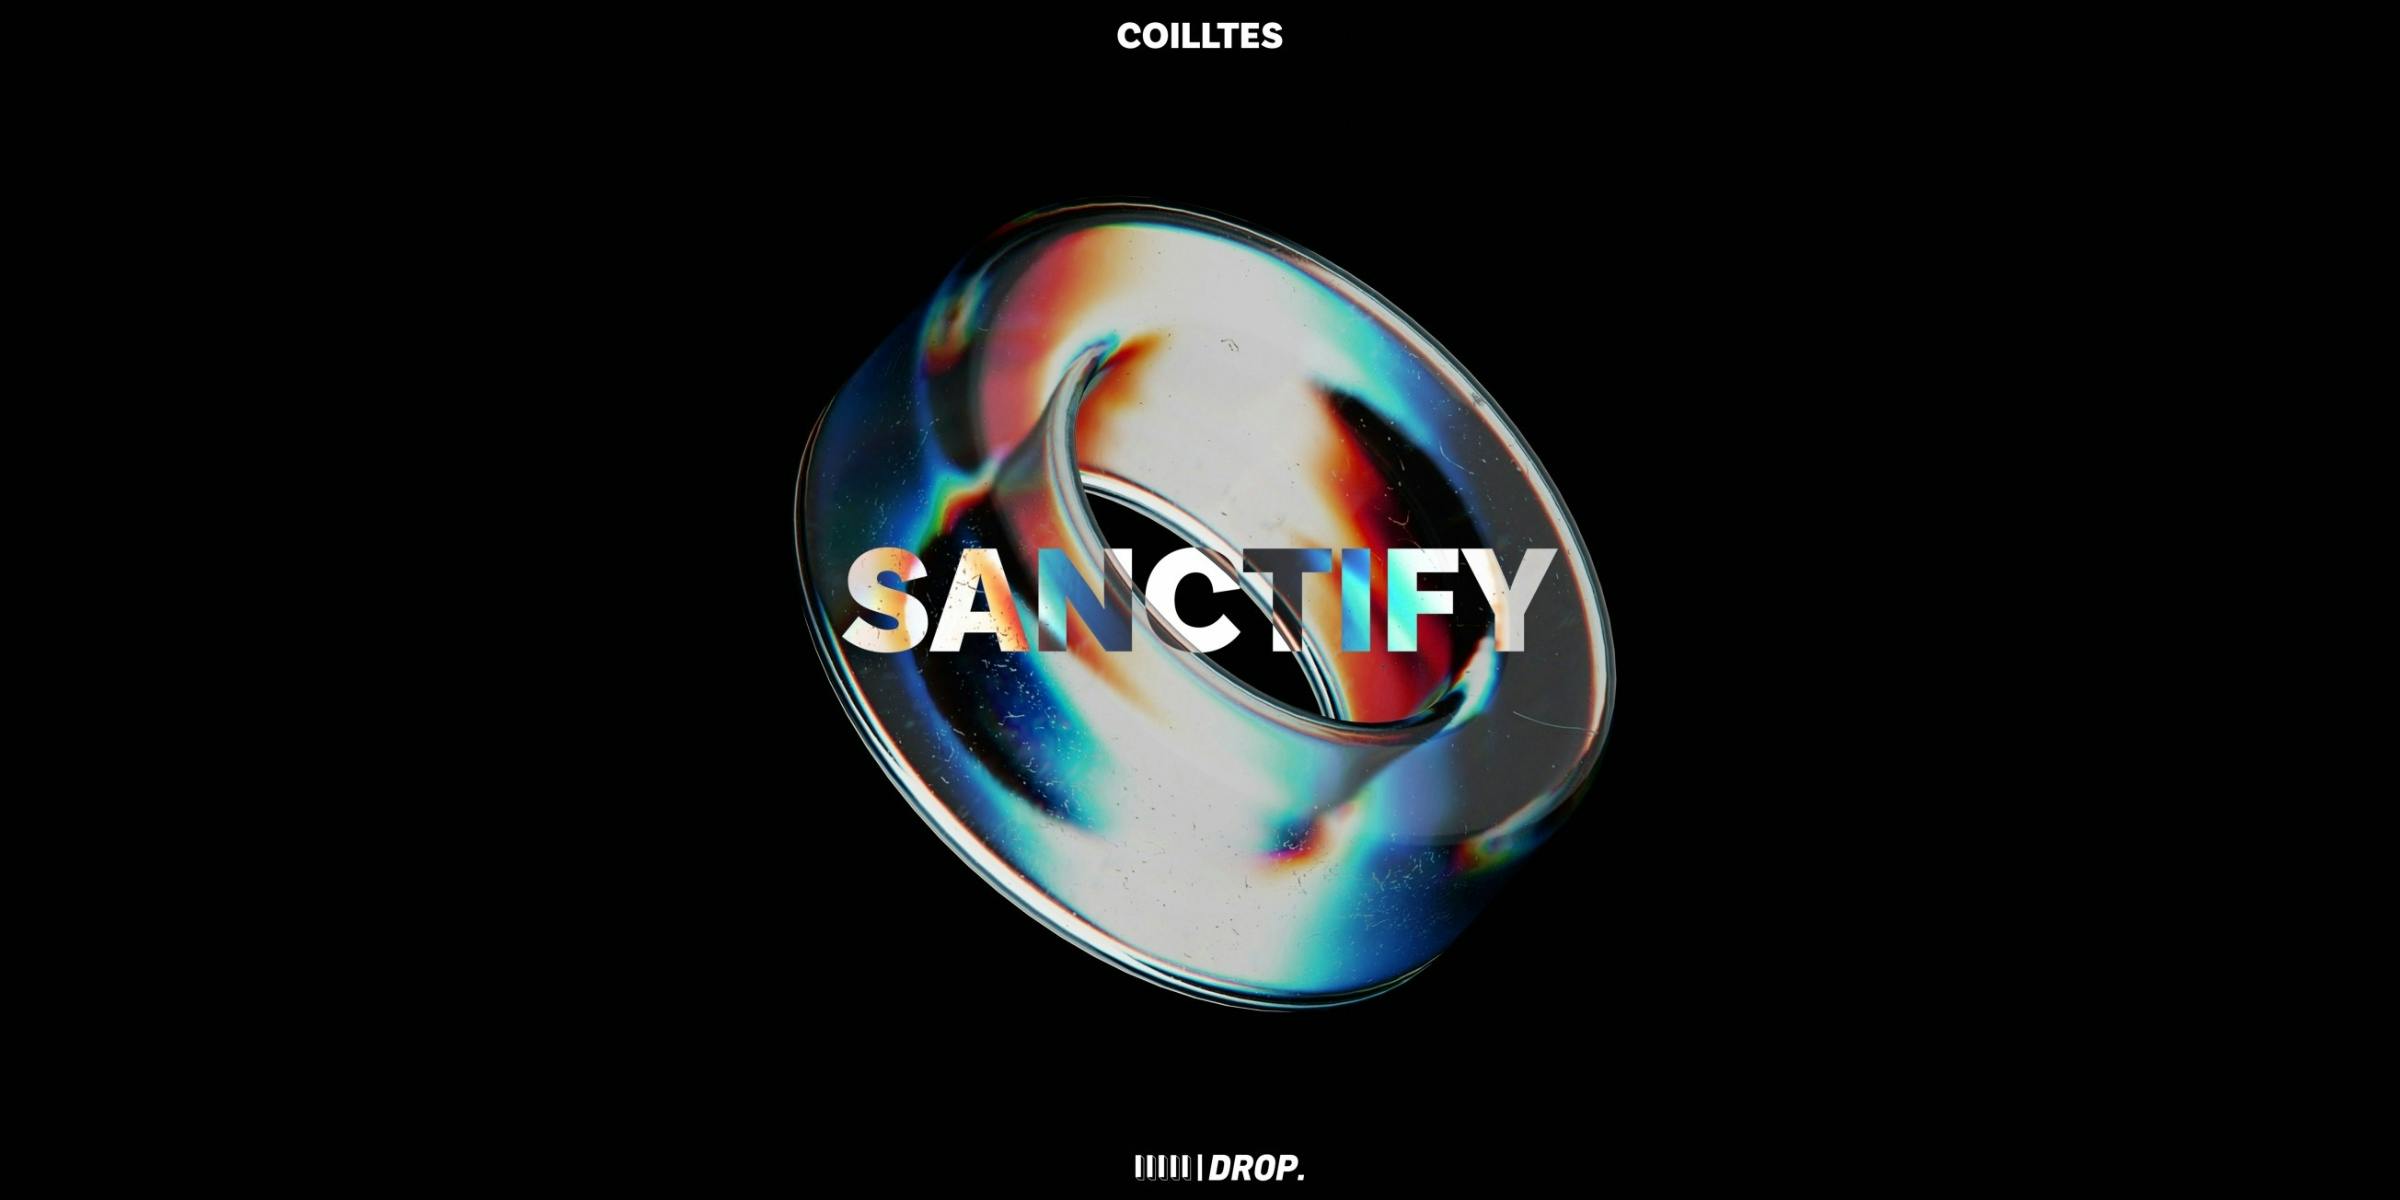 Coilltes Delivers His DROP Debut With 'Sanctify'